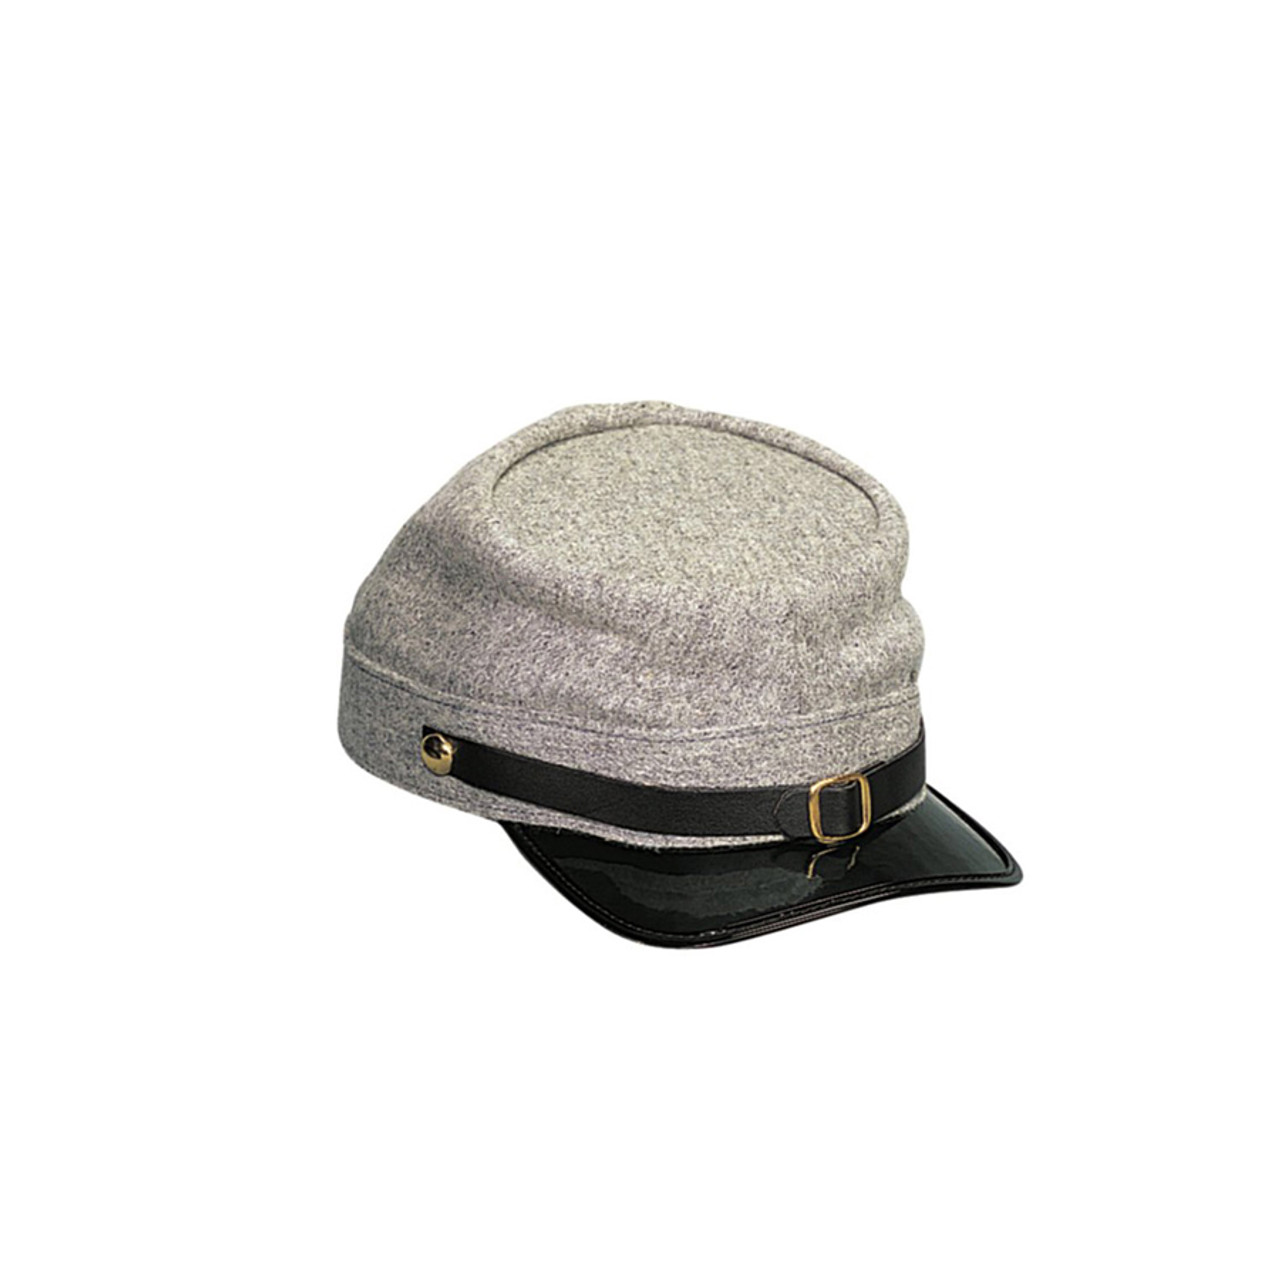 confederate soldiers hat